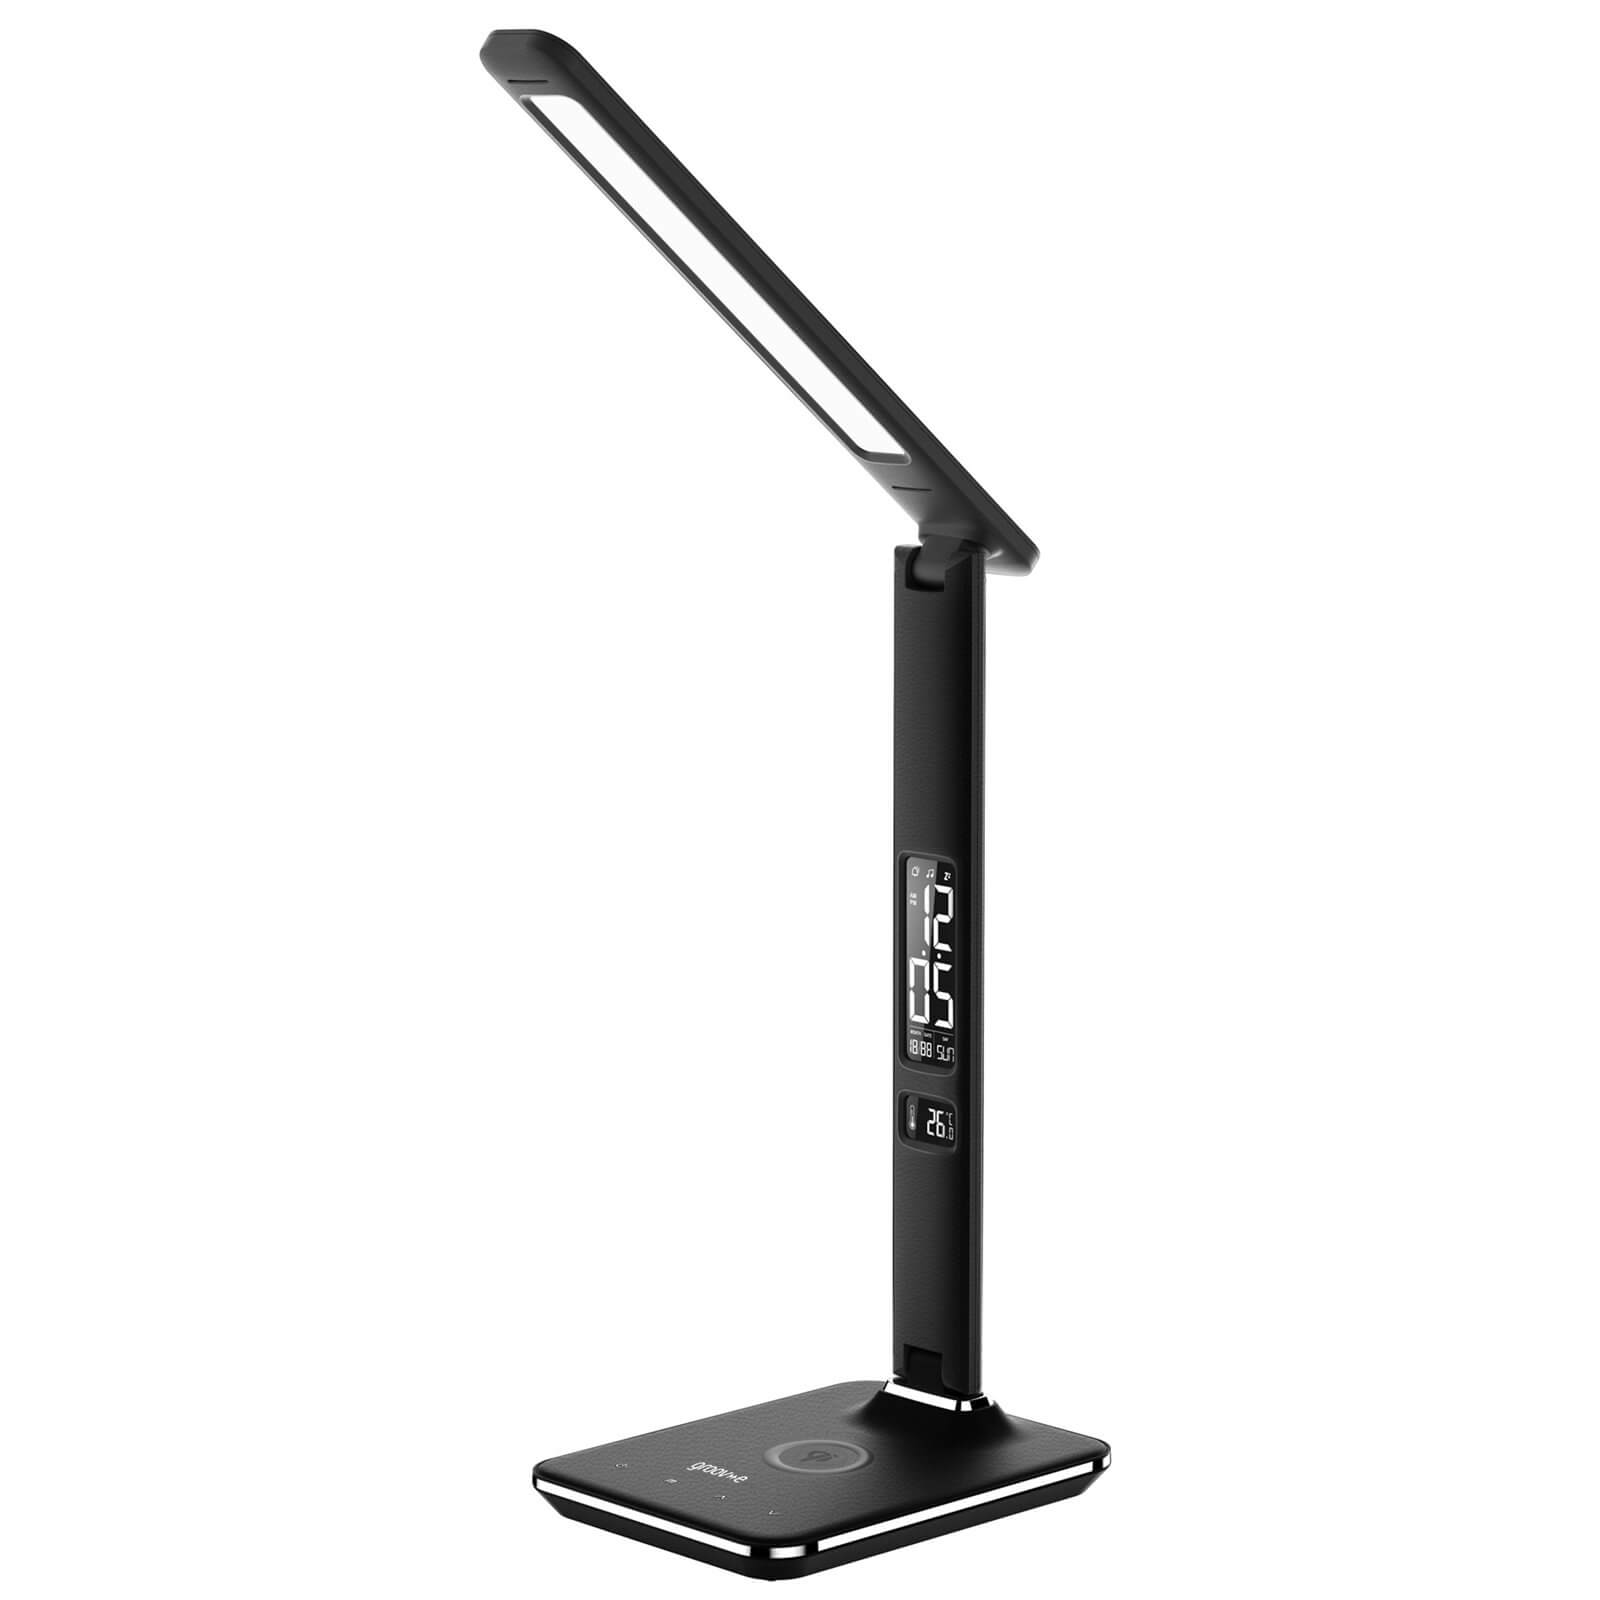 Groov-E Ares LED Desk Lamp Alarm Clock with Wireless Charging Pad - Black